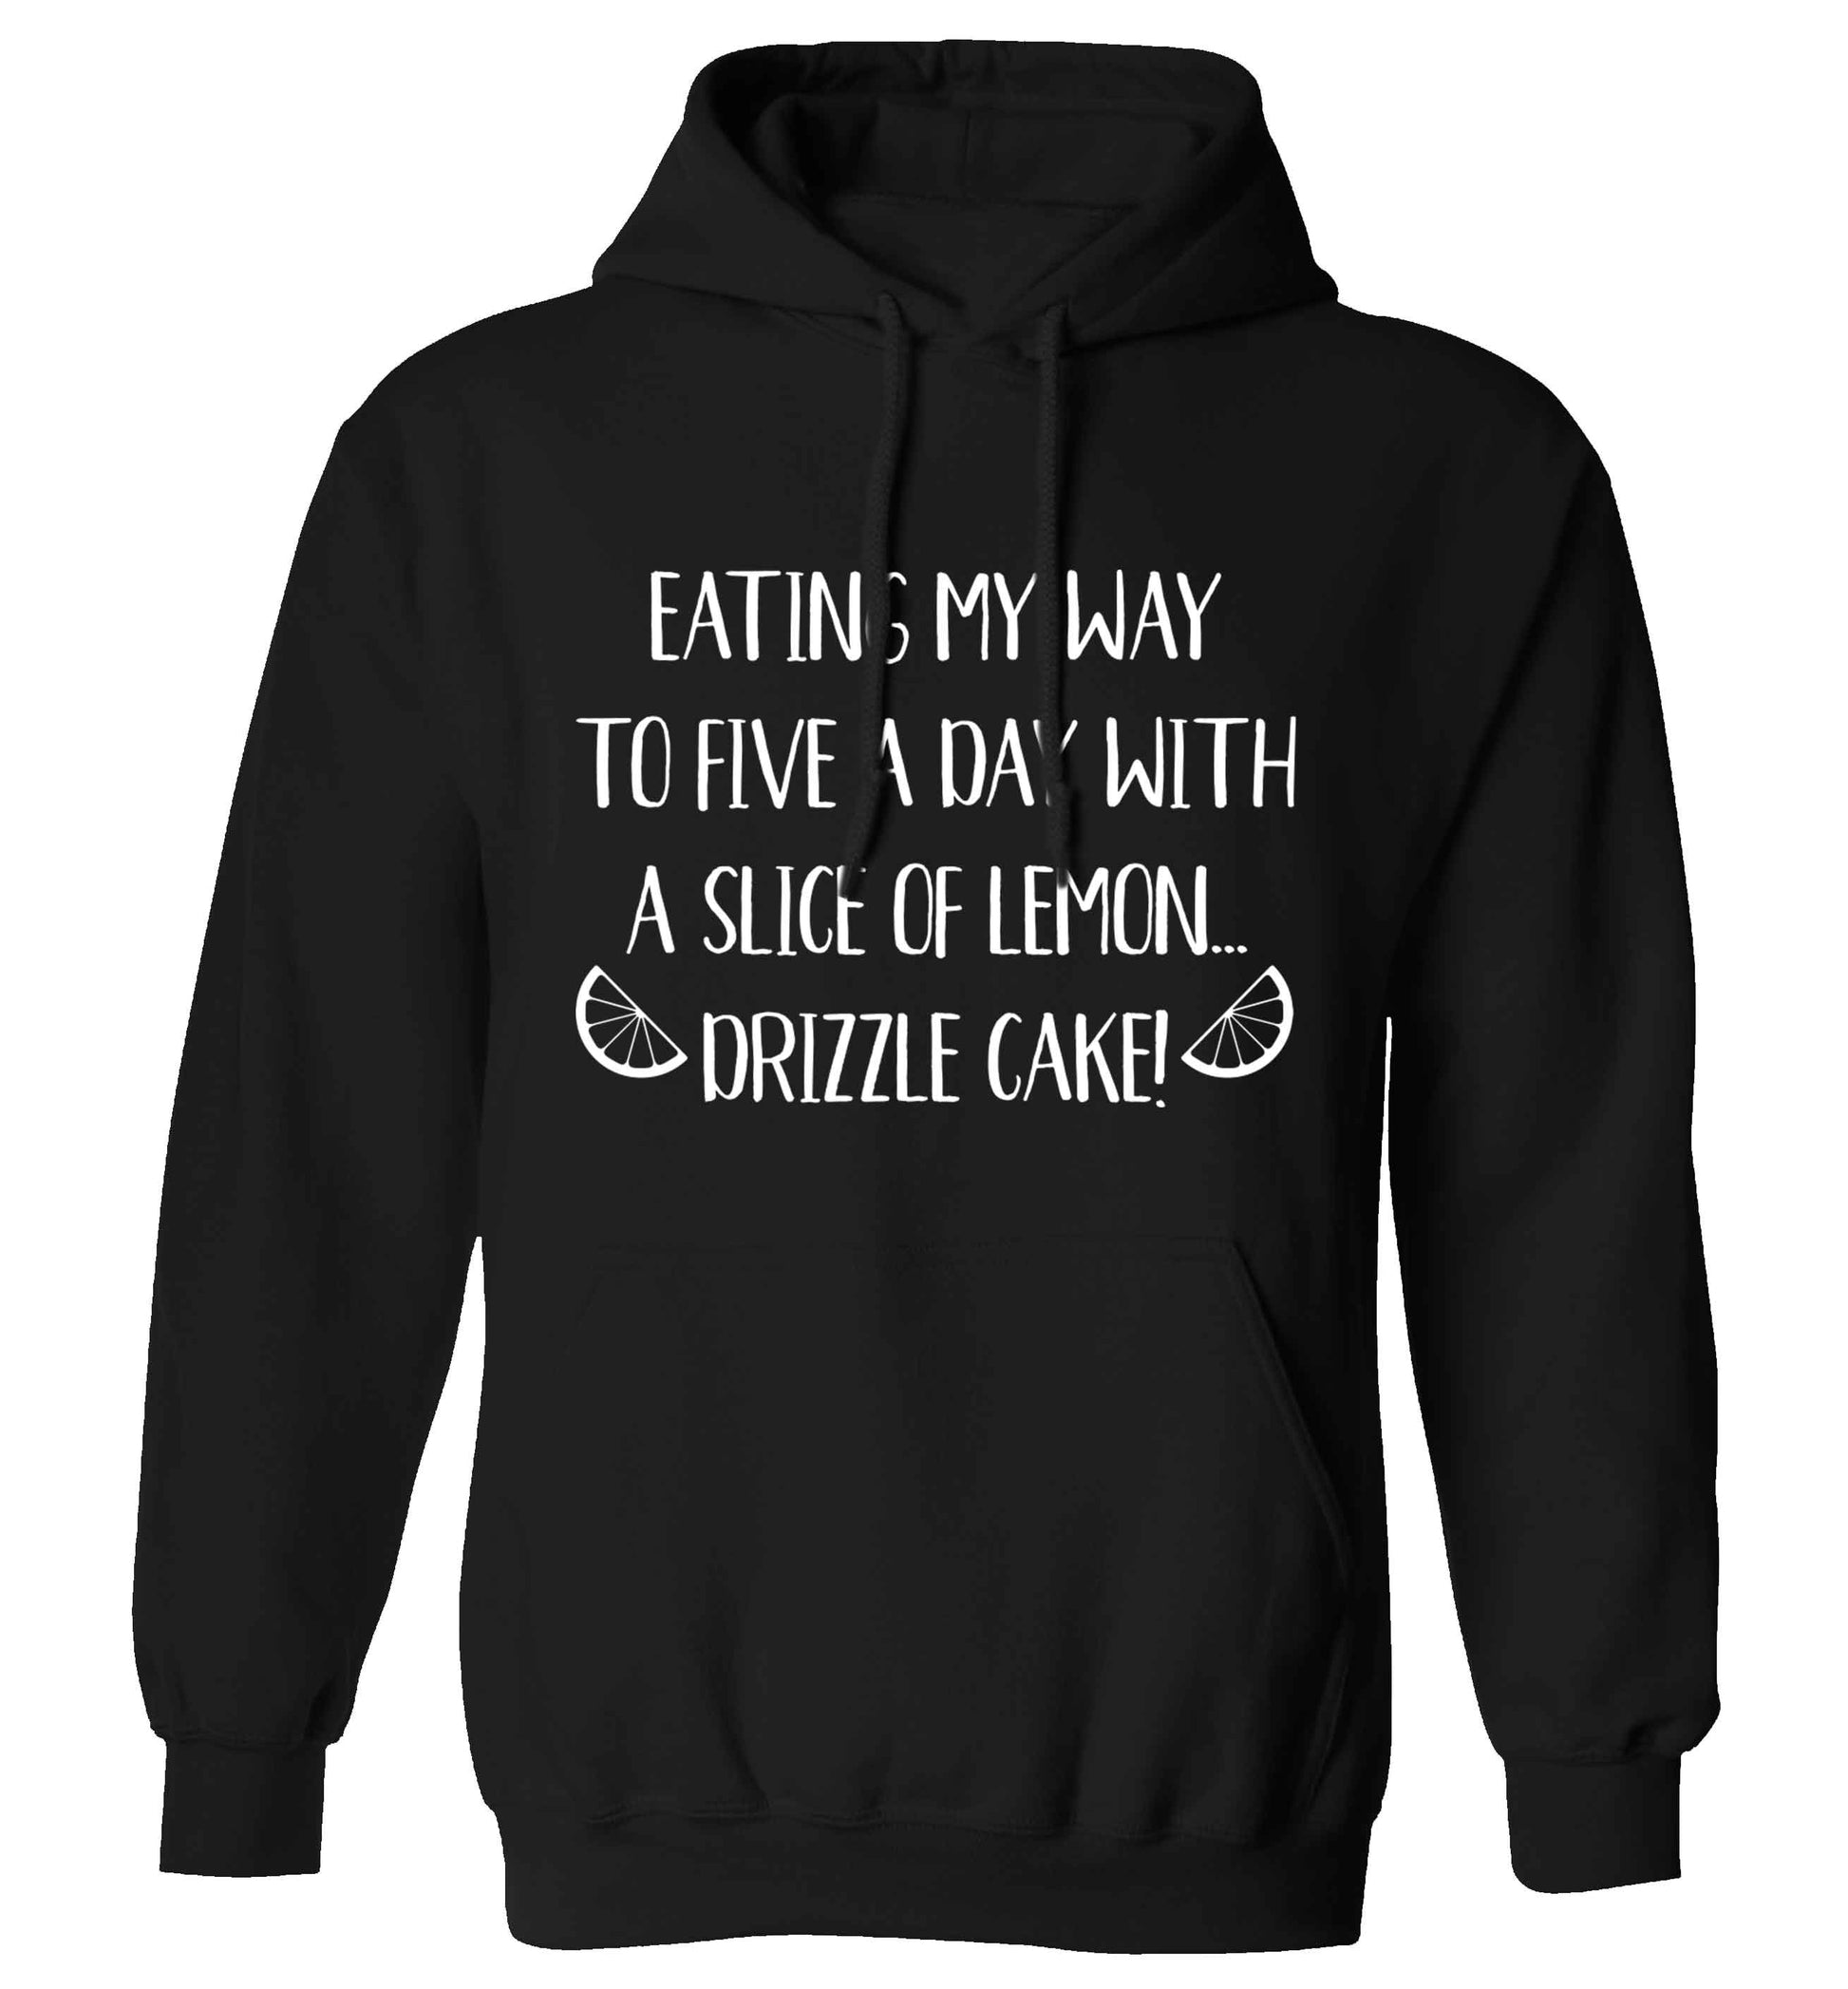 Eating my way to five a day with a slice of lemon drizzle cake day adults unisex black hoodie 2XL